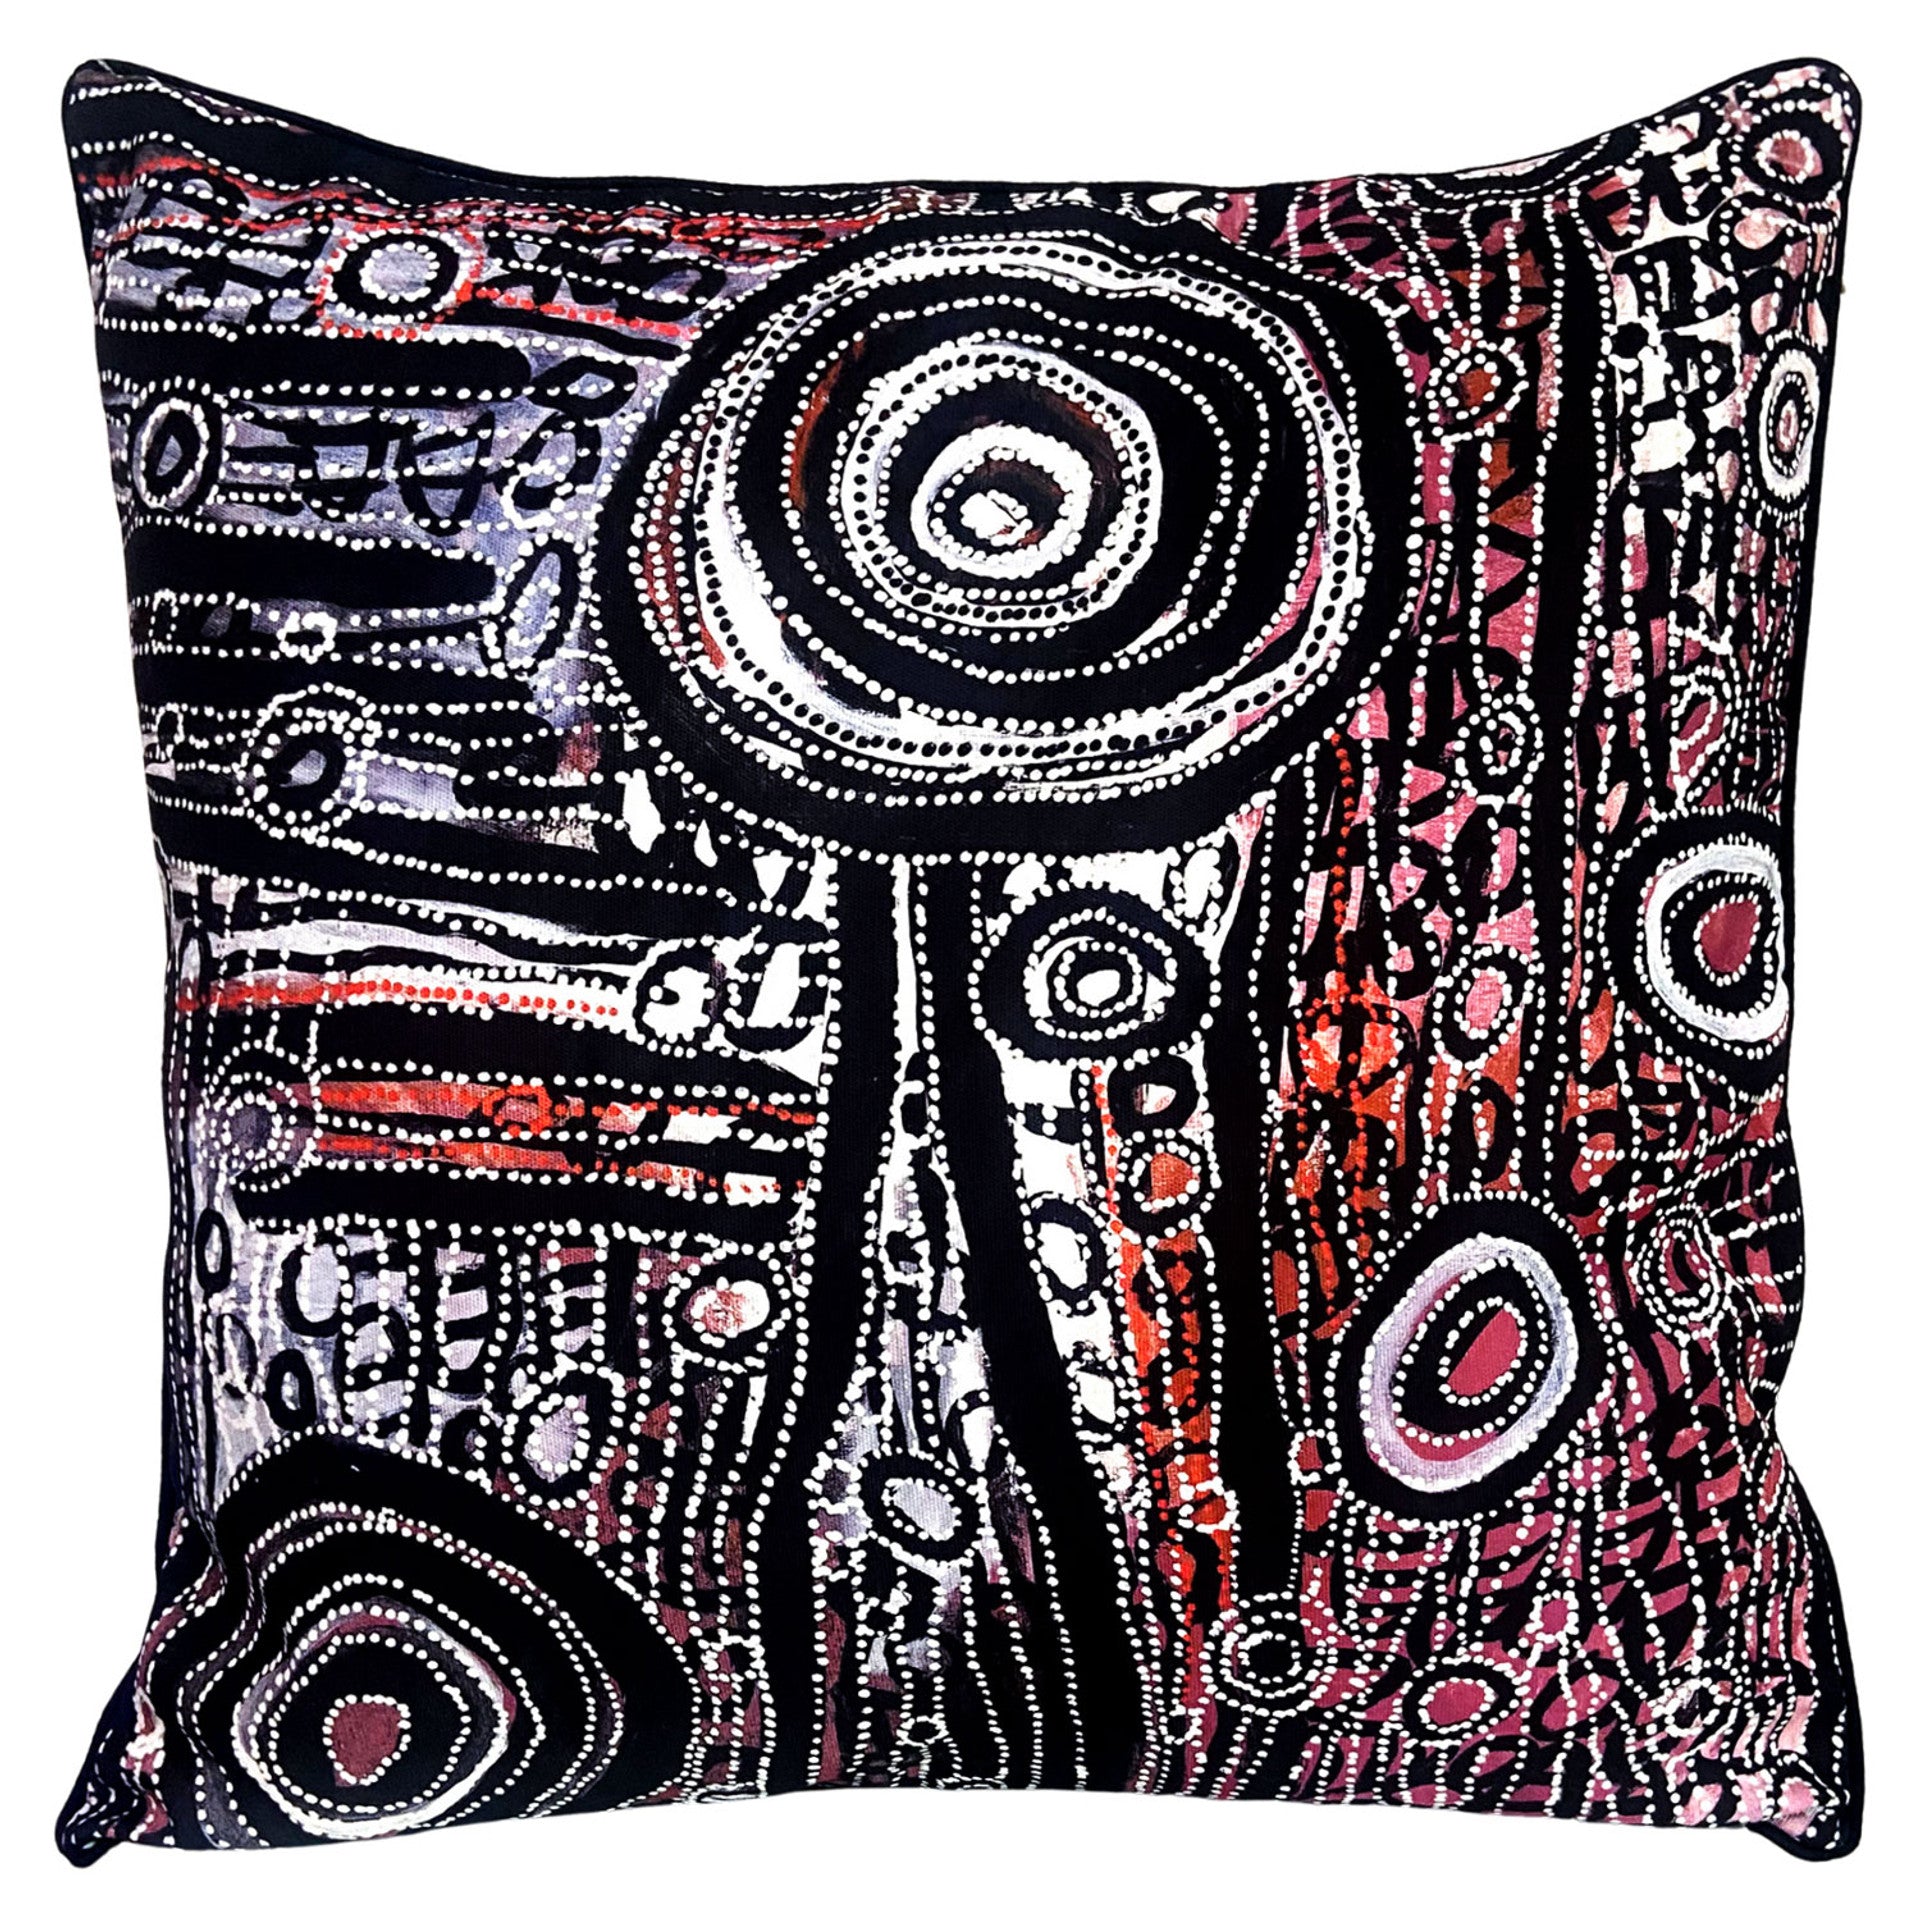 Outdoor Cushion Cover - Charmaine Pwerle - Black and White